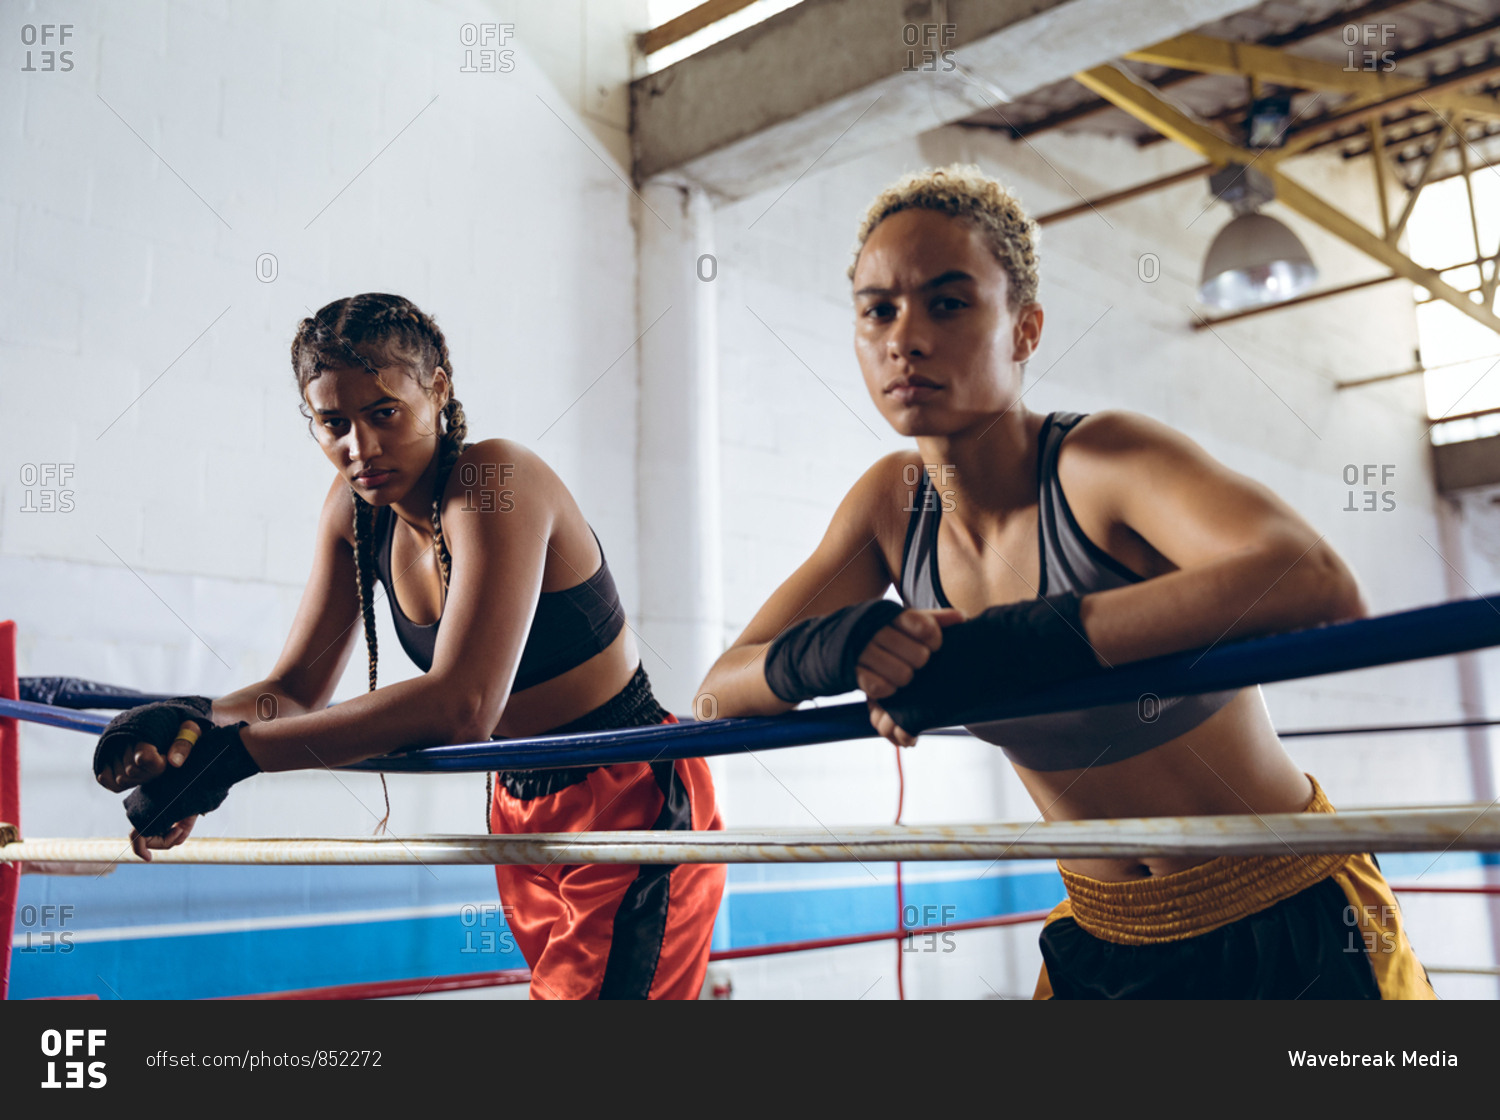 Female boxers leaning on ropes and looking at camera in boxing ring at boxing club